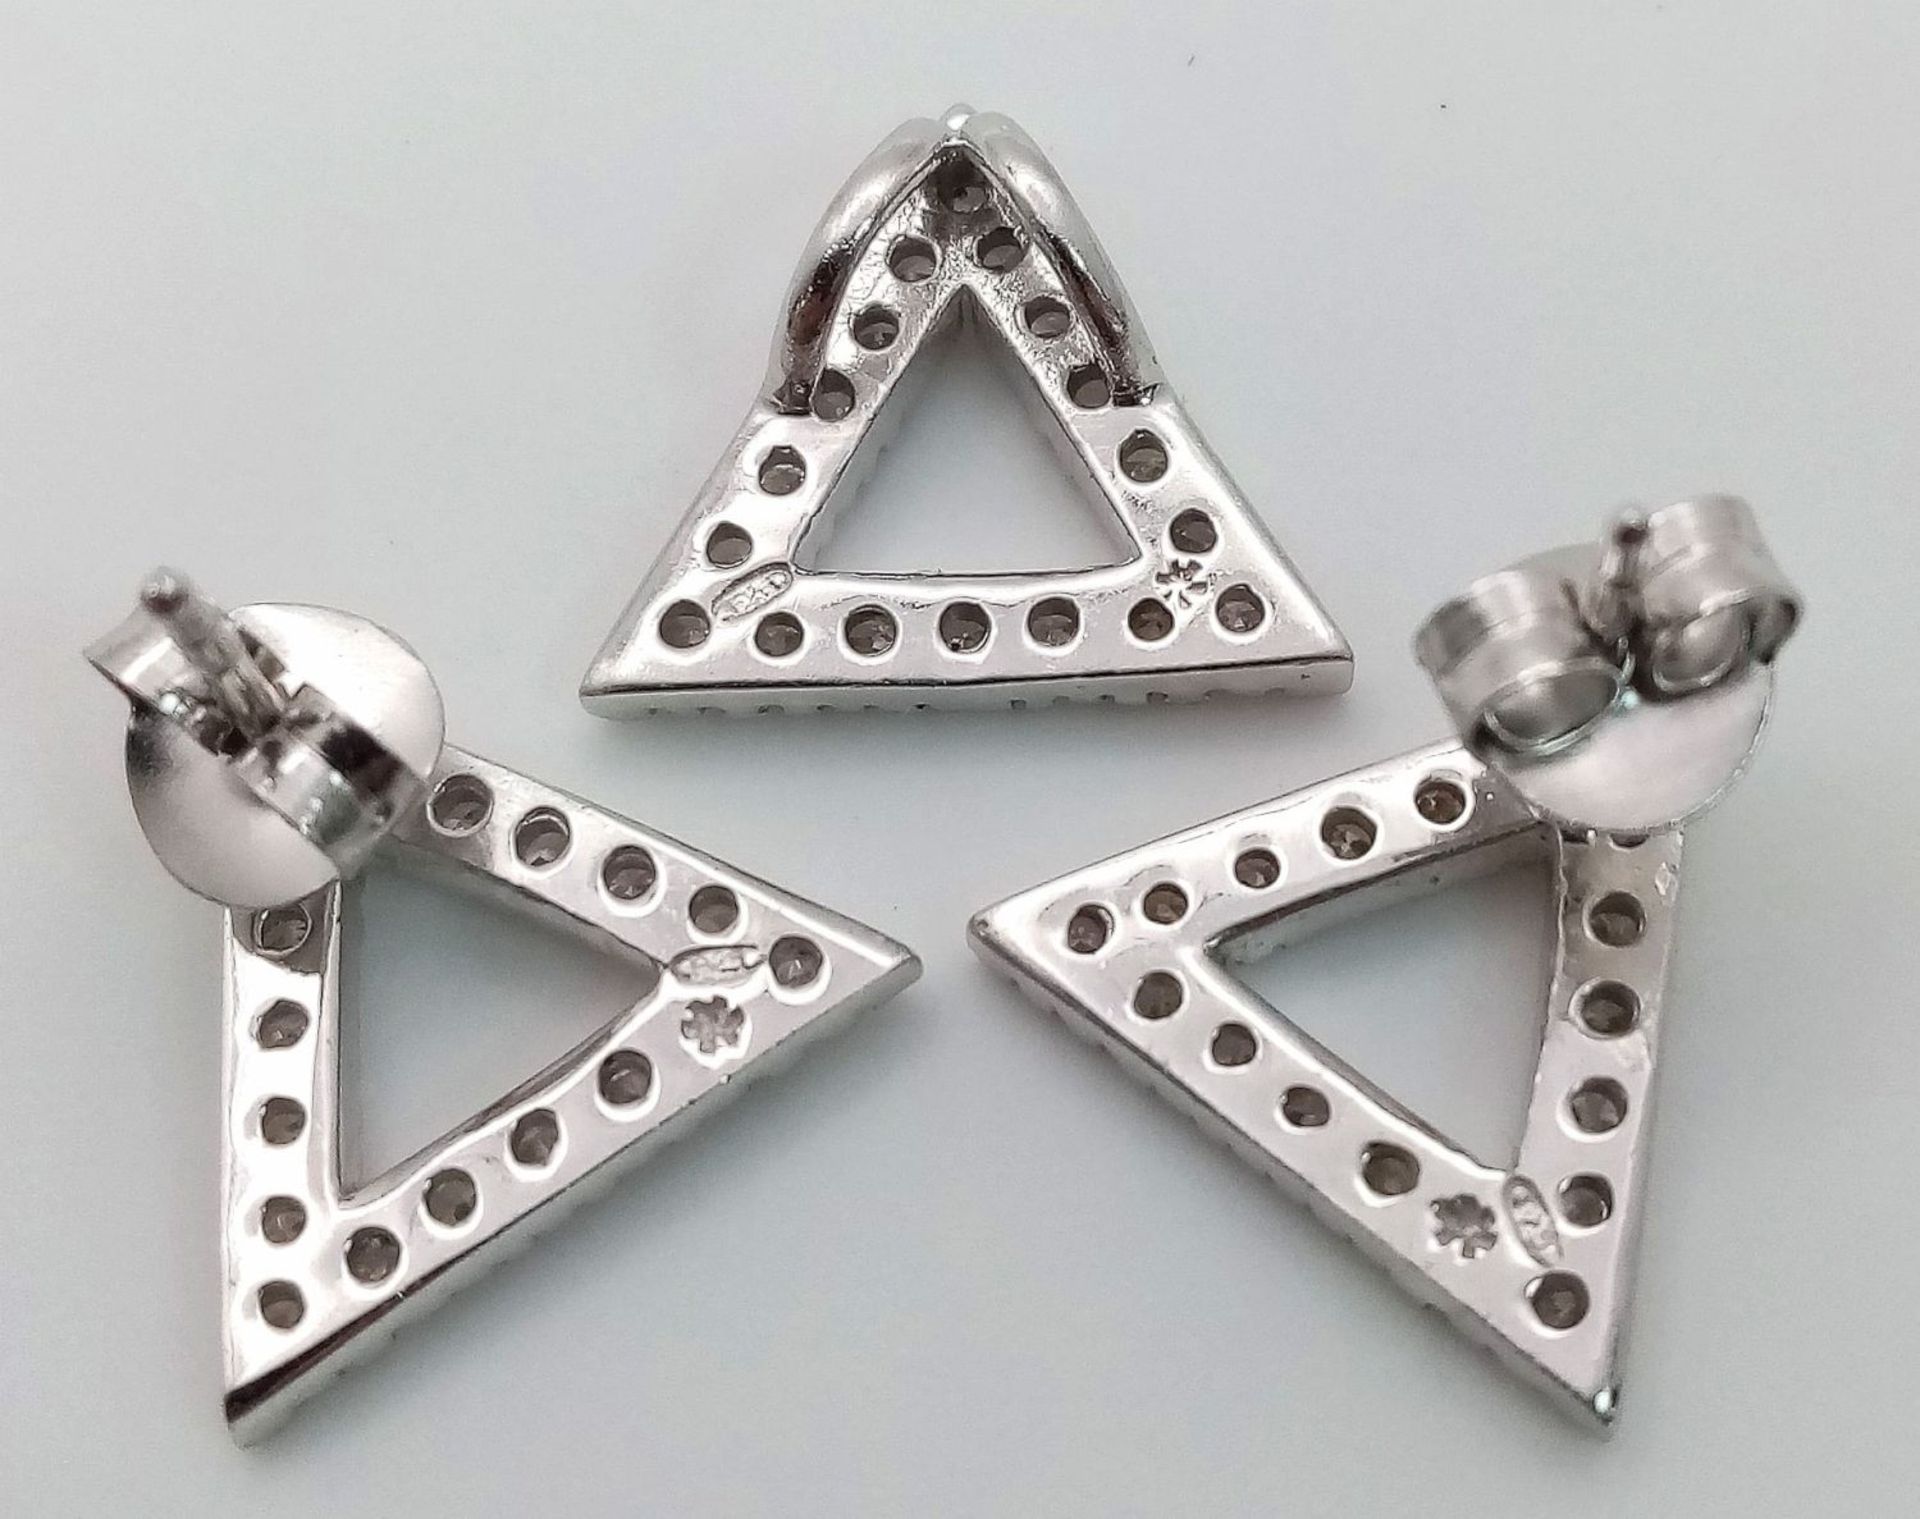 A MATCHING SET OF STERLING SILVER STONE SET TRINGULAR STUD EARRINGS AND PENDANT, WEIGHT 4.1G - Image 5 of 6